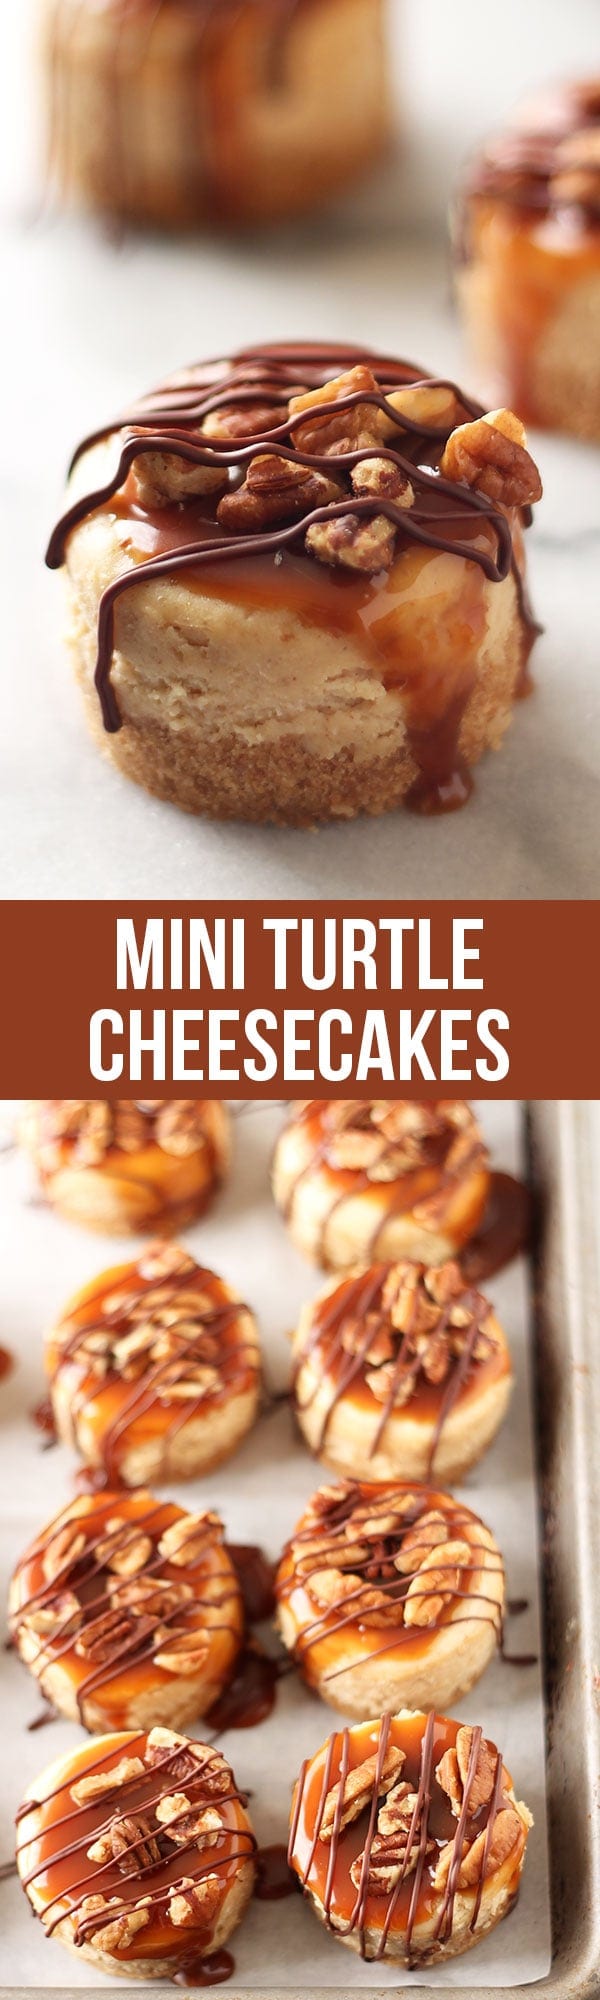 These lasted 2 MINUTES! Everyone loved them. Mini Turtle Cheesecakes feature a thick graham cracker crust, vanilla cheesecake filling, and are topped with caramel, toasted pecans, and chocolate!